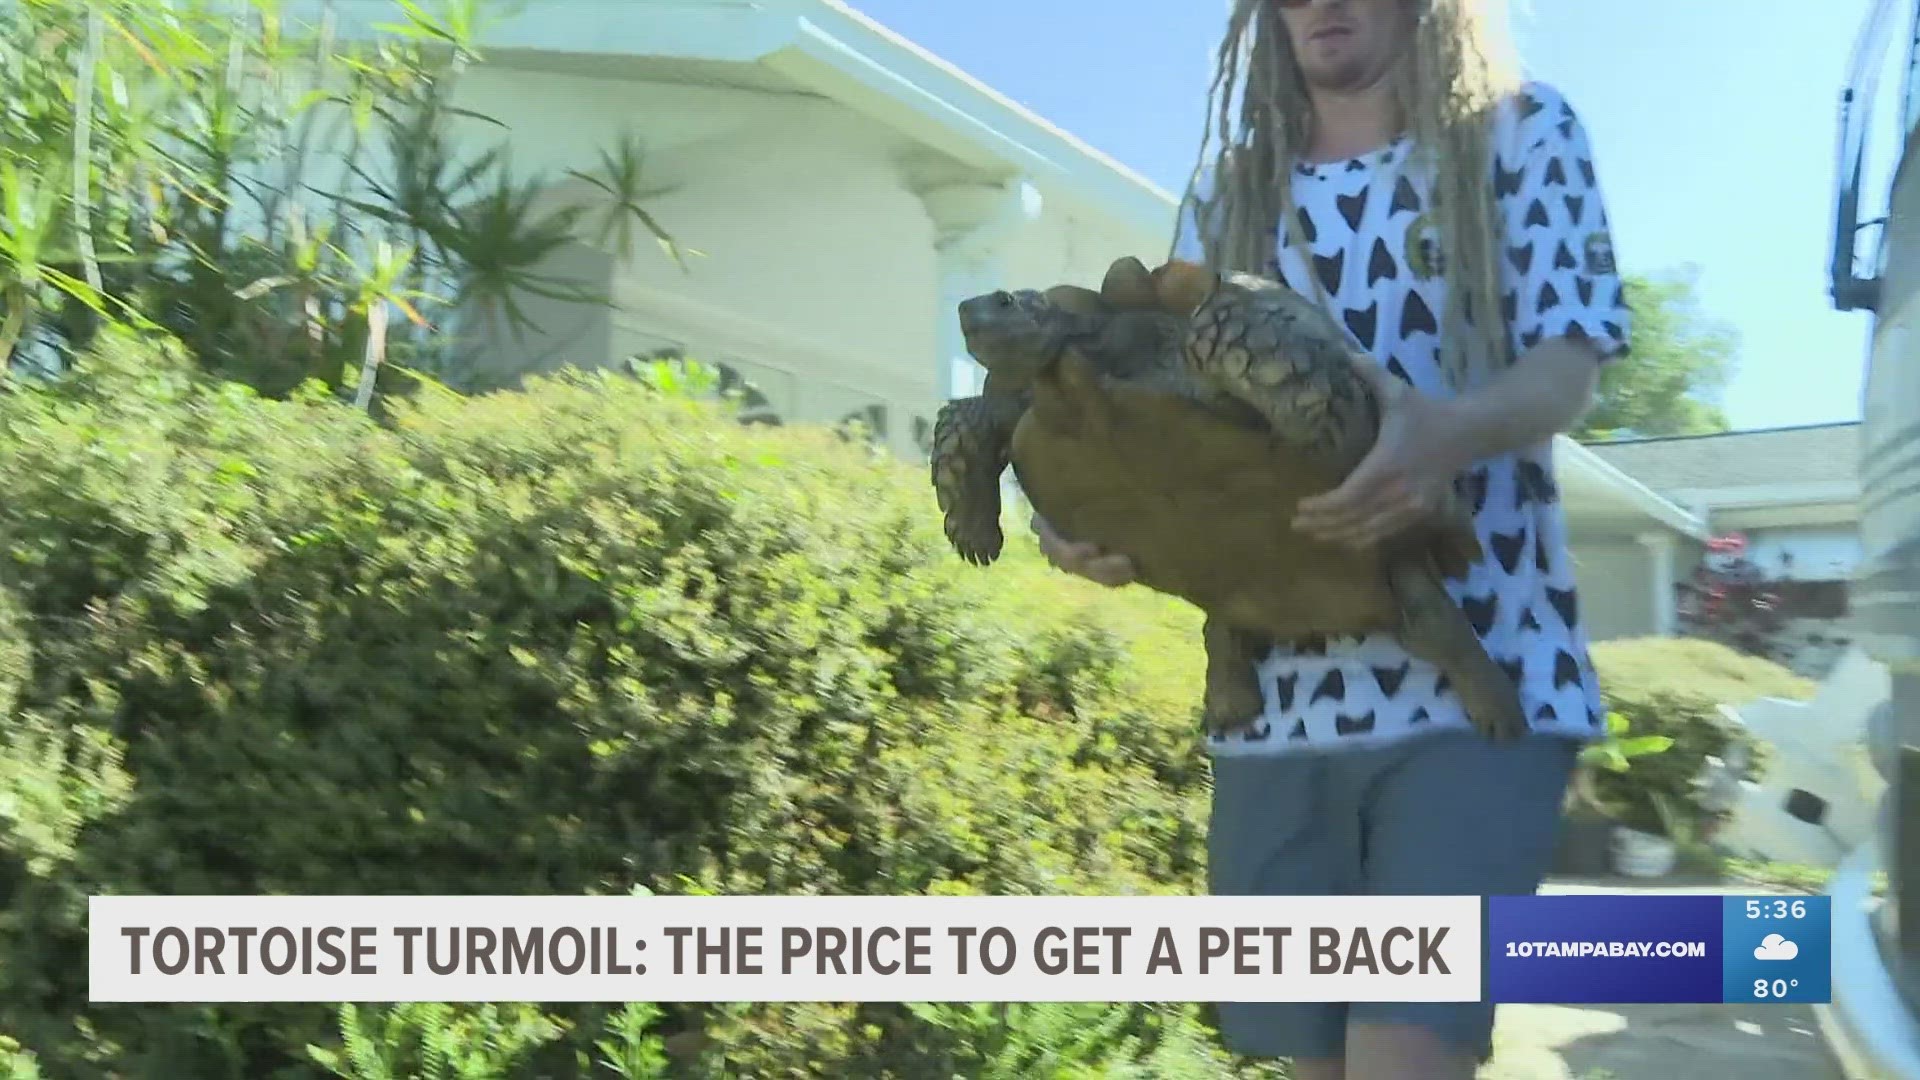 The saga began when Merrick Westlund says he came home from work to find his beloved 18-year-old tortoise was missing.